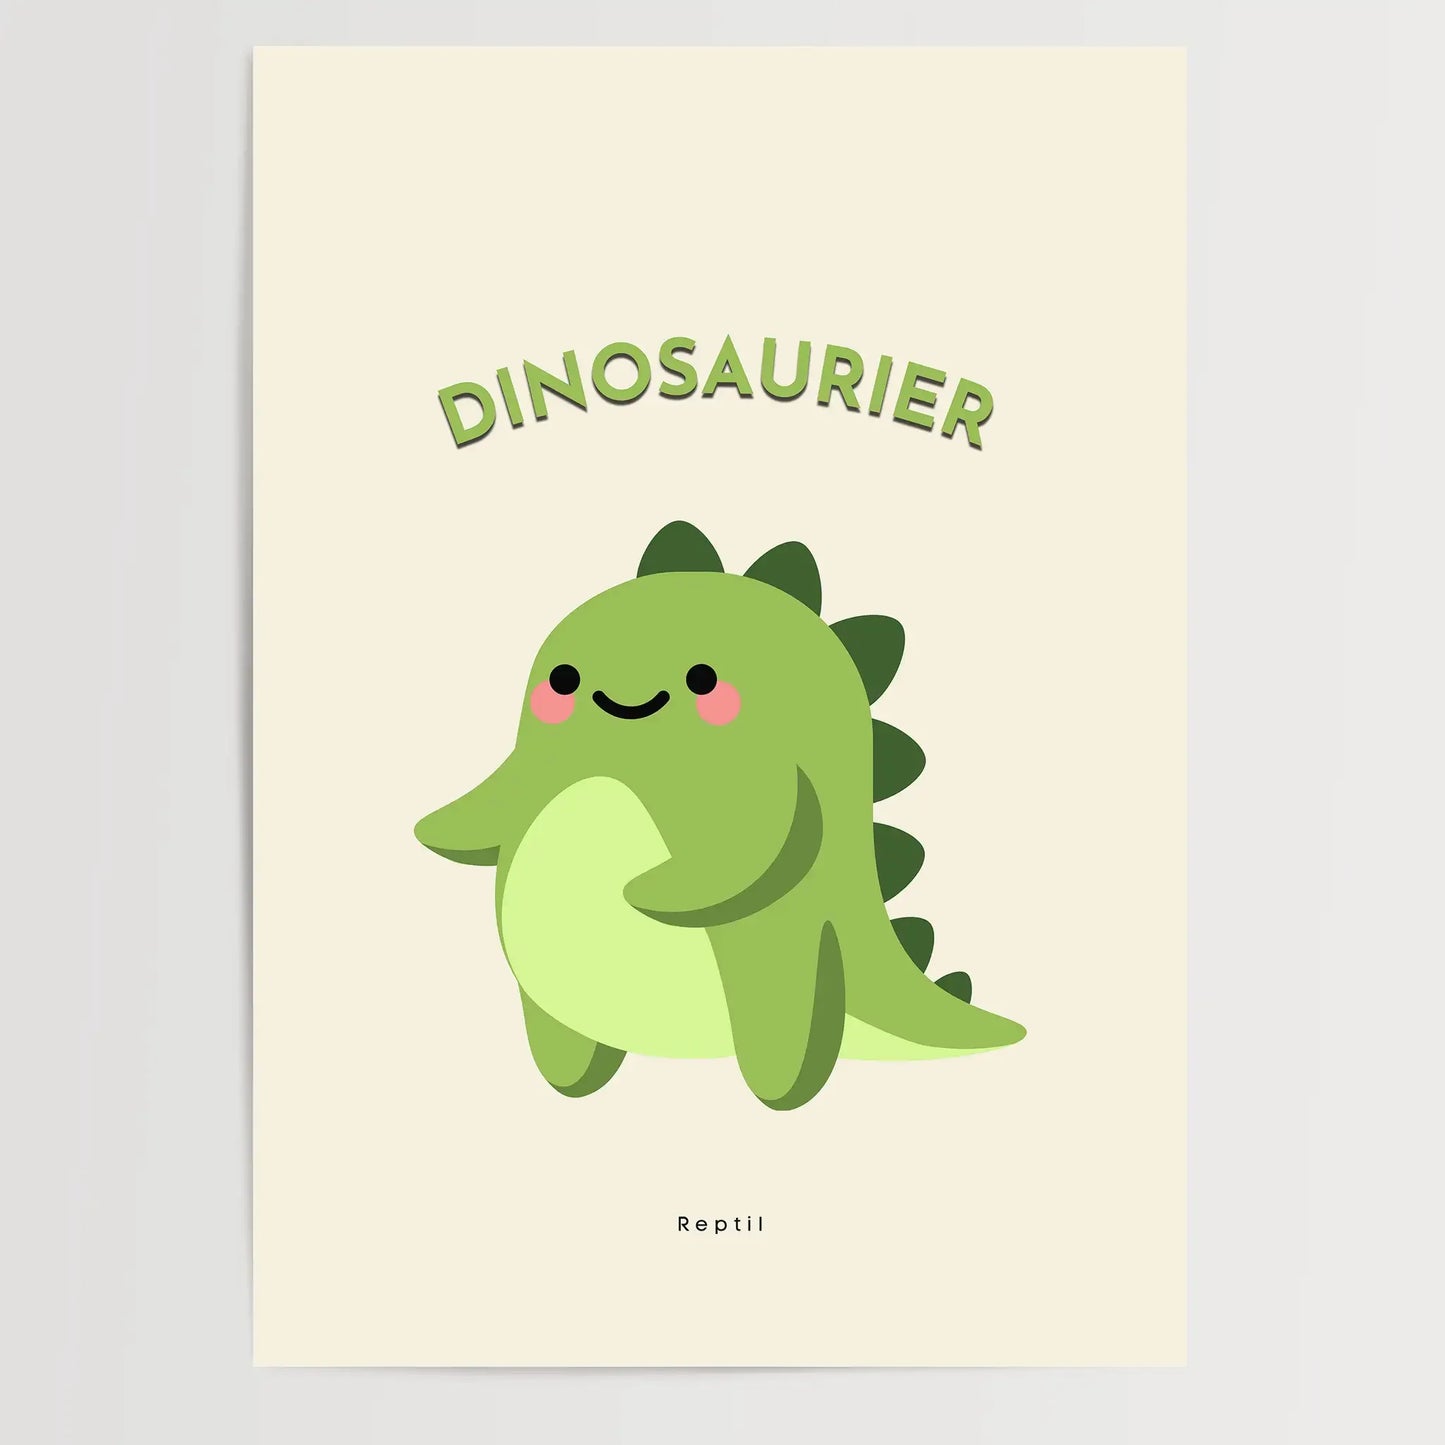 Dinosaurier- Poster